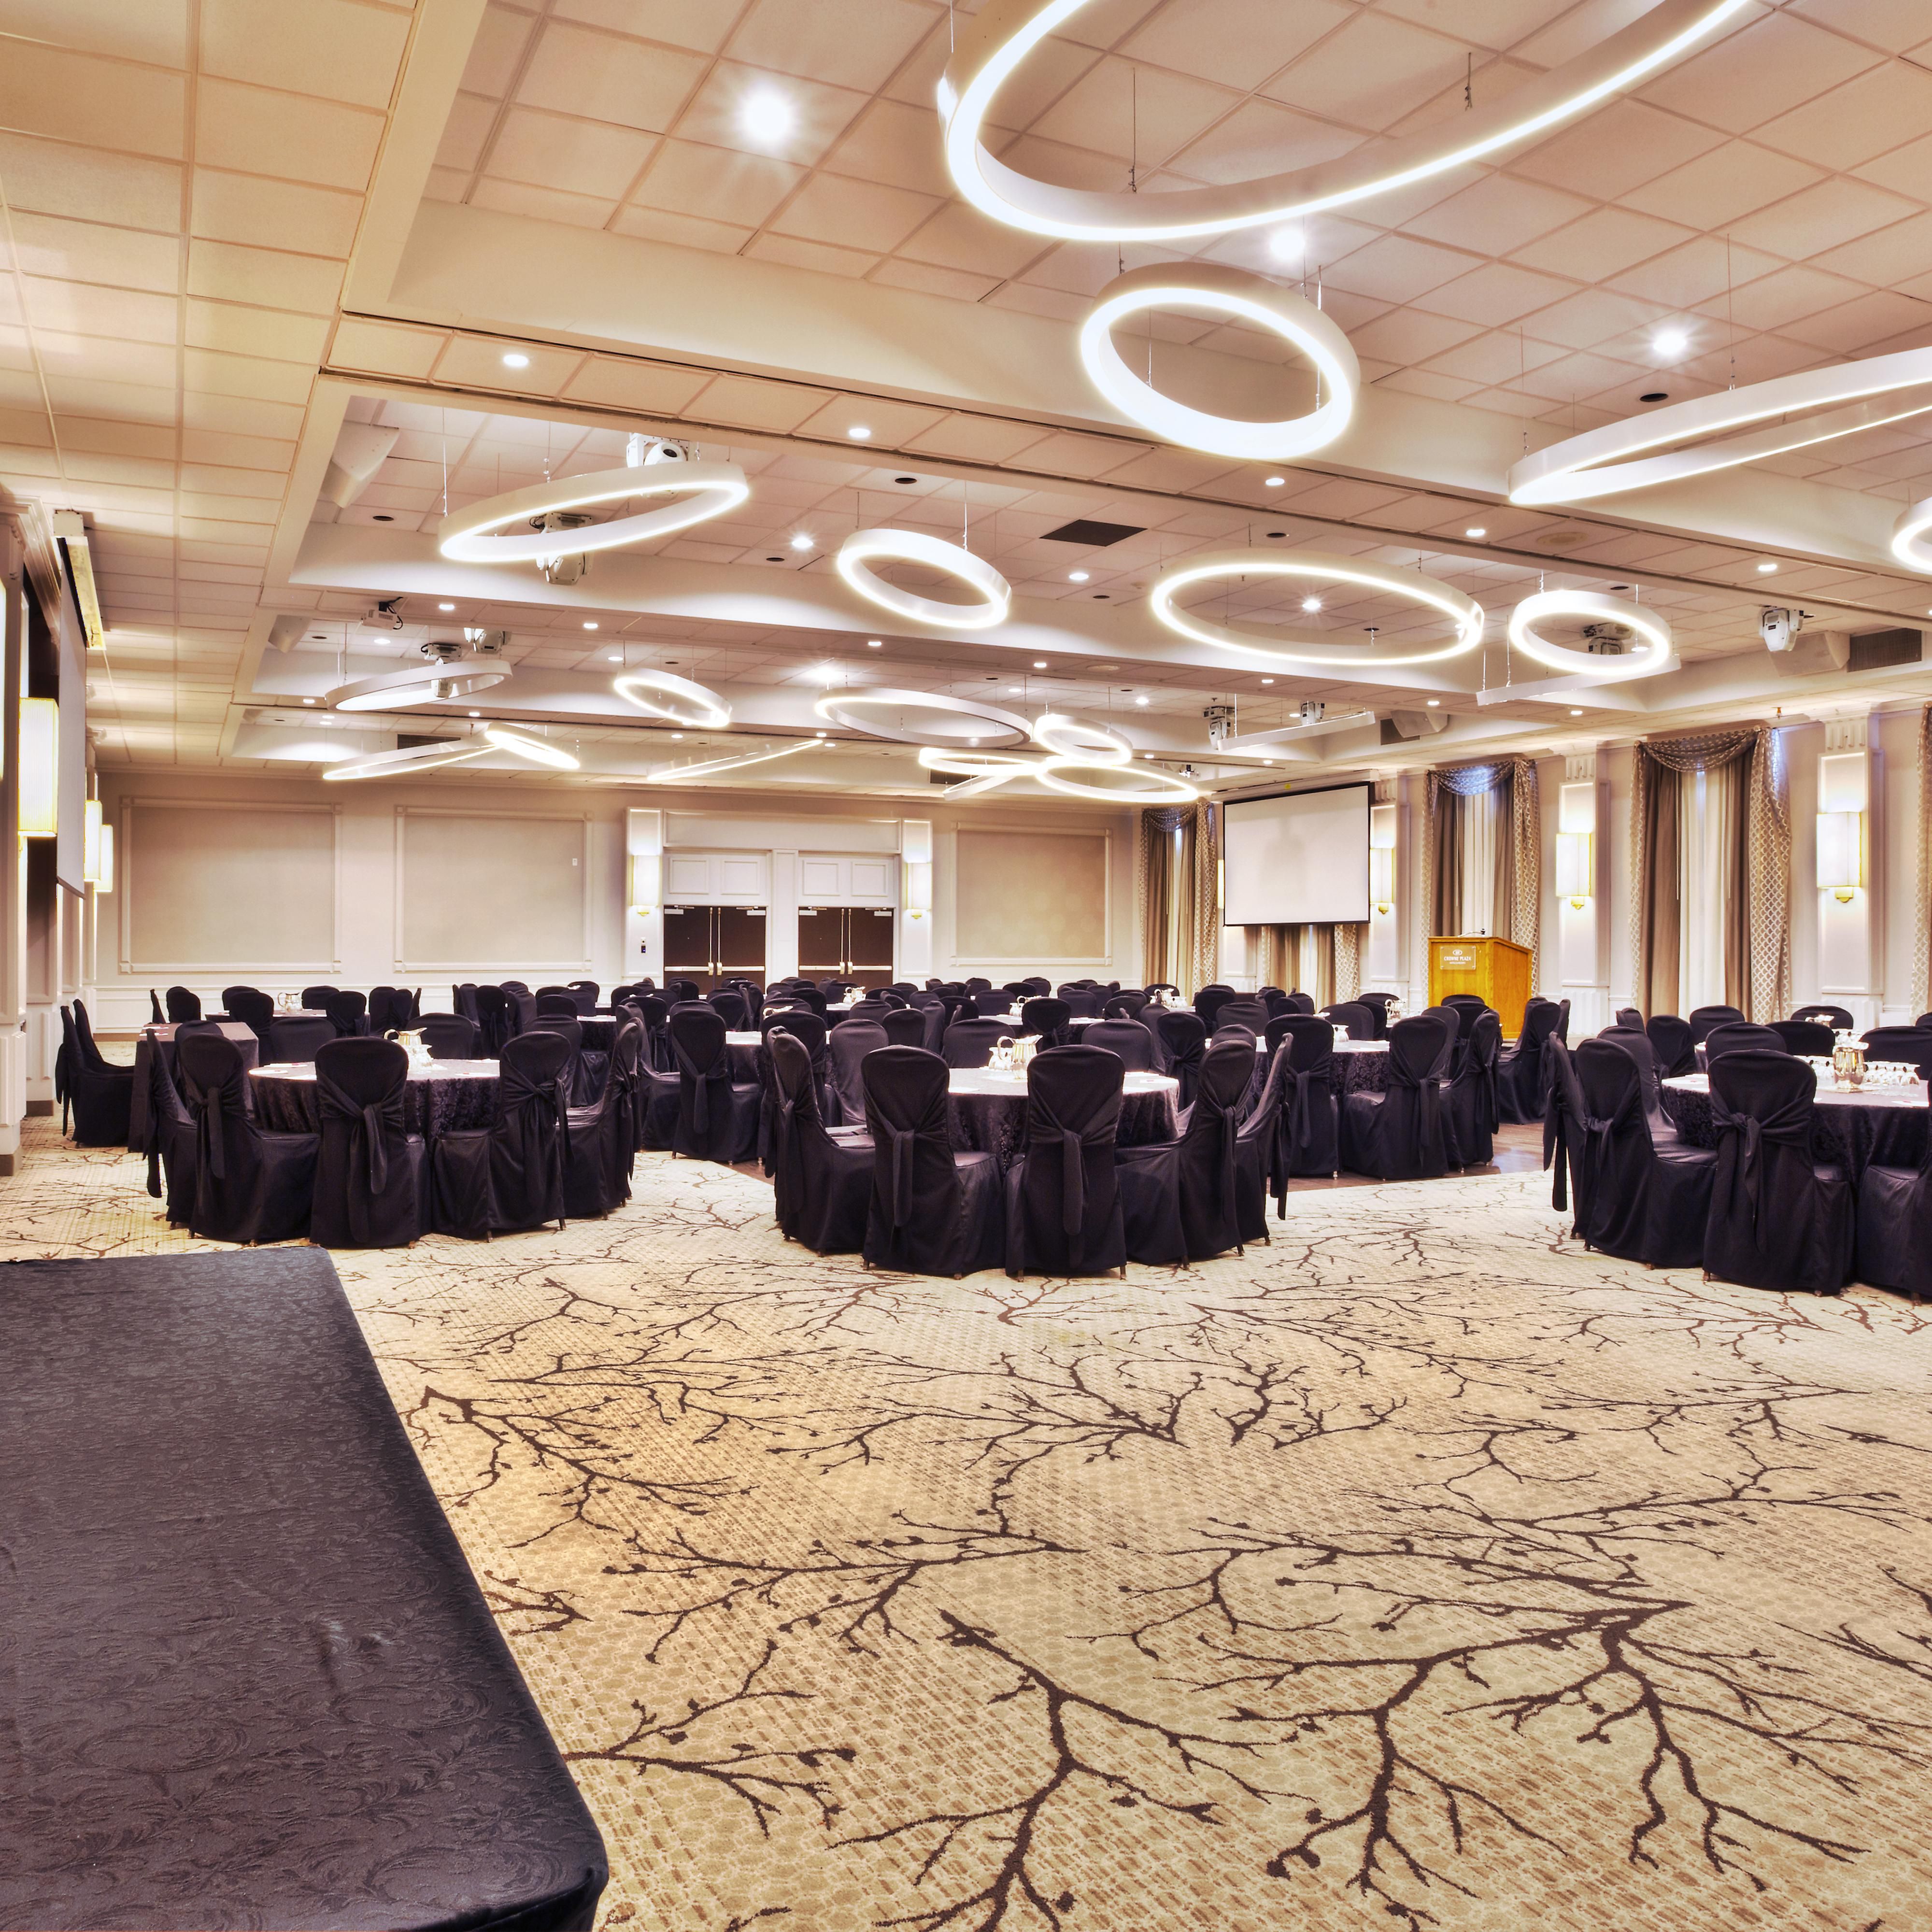 Let us take care of you and your event in our Ball Room.